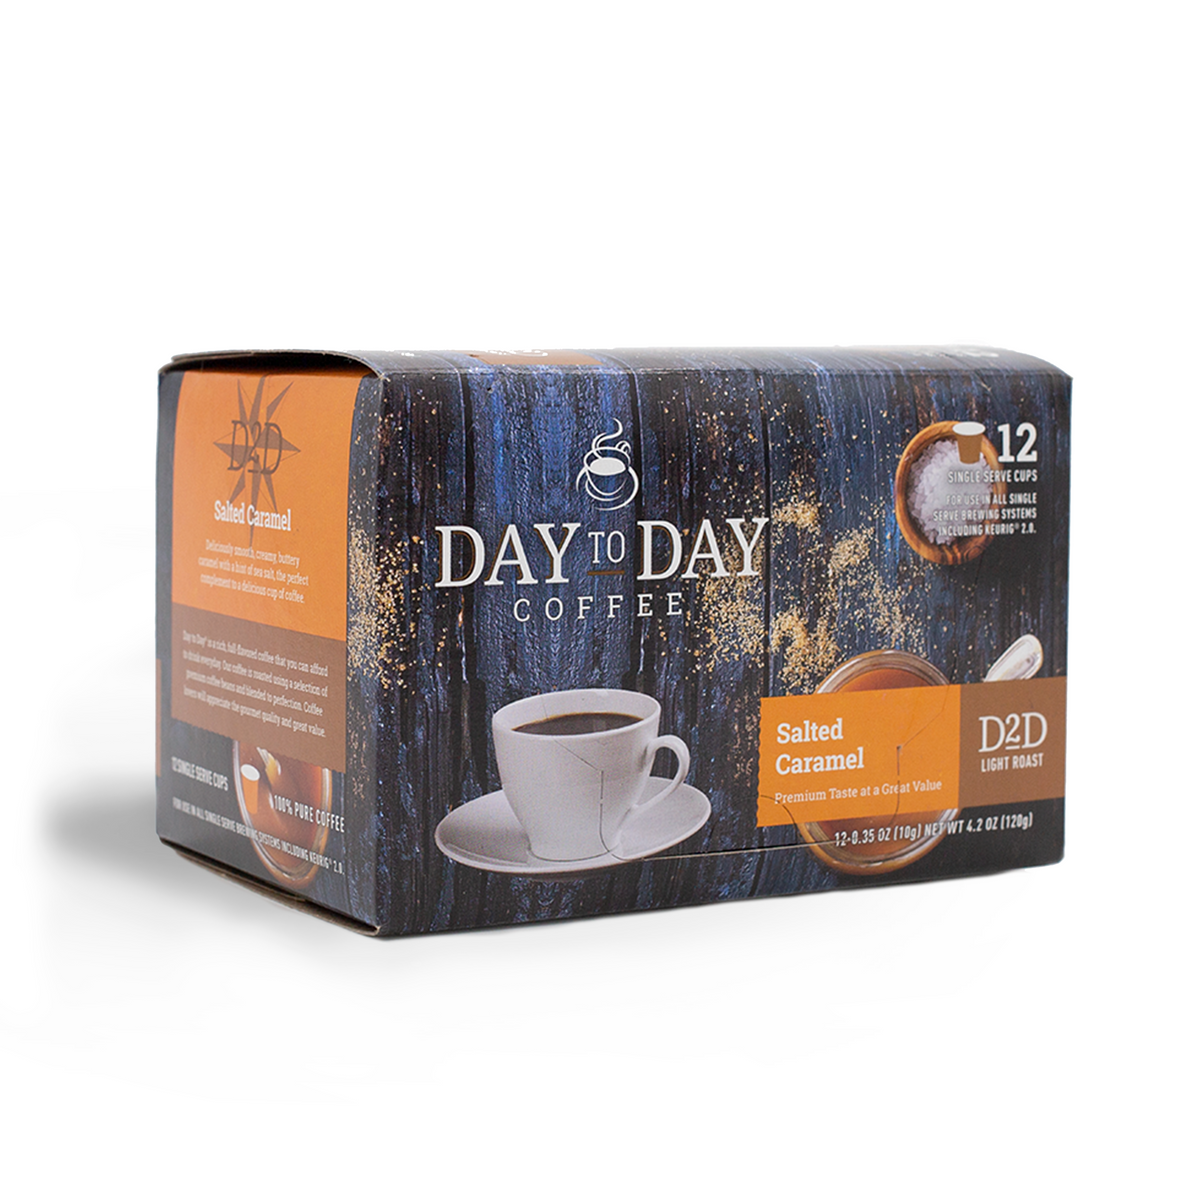 Day to day coffee 12 count salted caramel light roast coffee pods for single serve coffee brewer